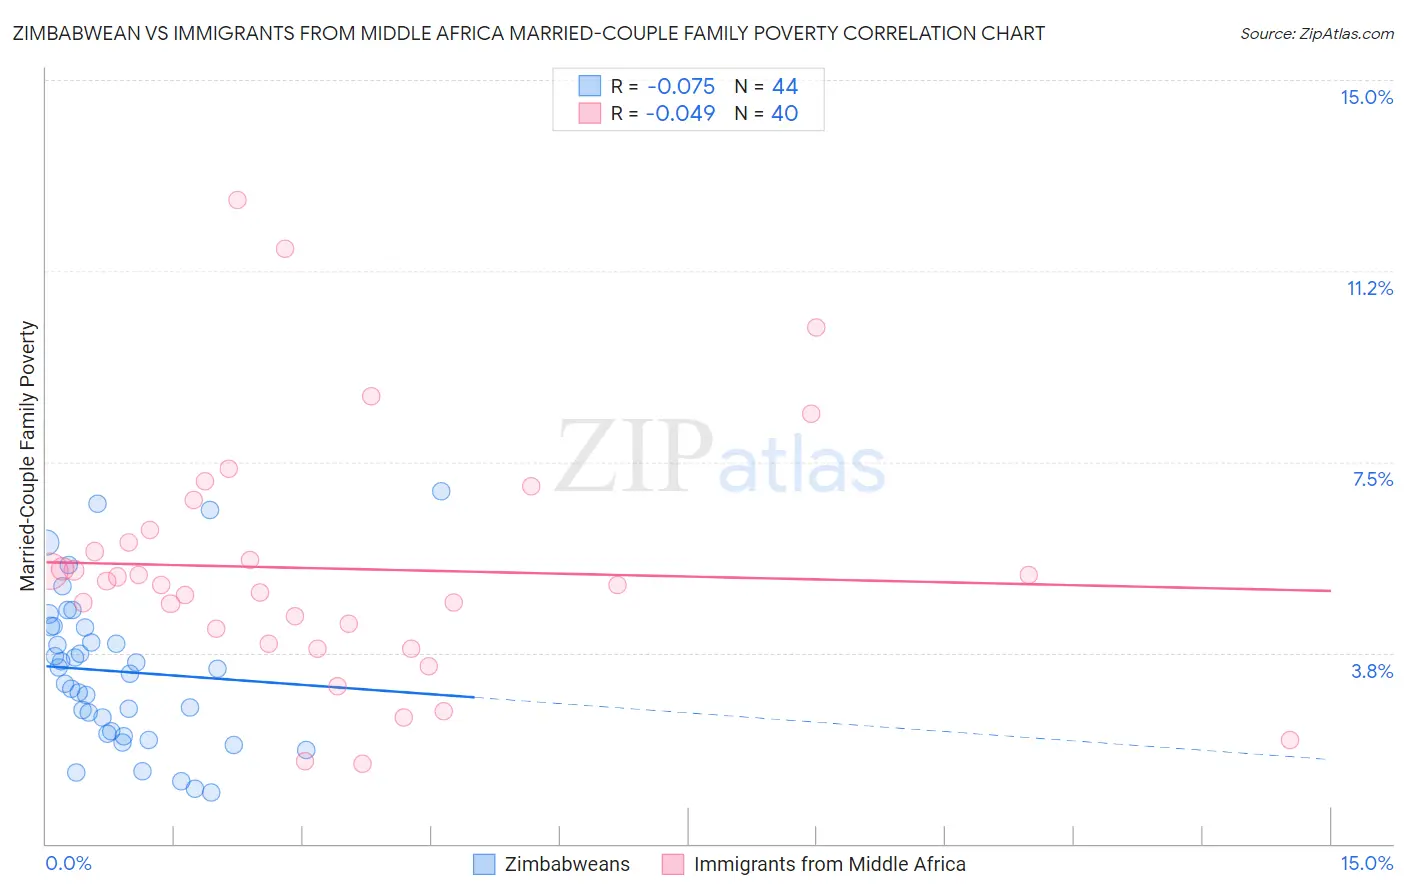 Zimbabwean vs Immigrants from Middle Africa Married-Couple Family Poverty